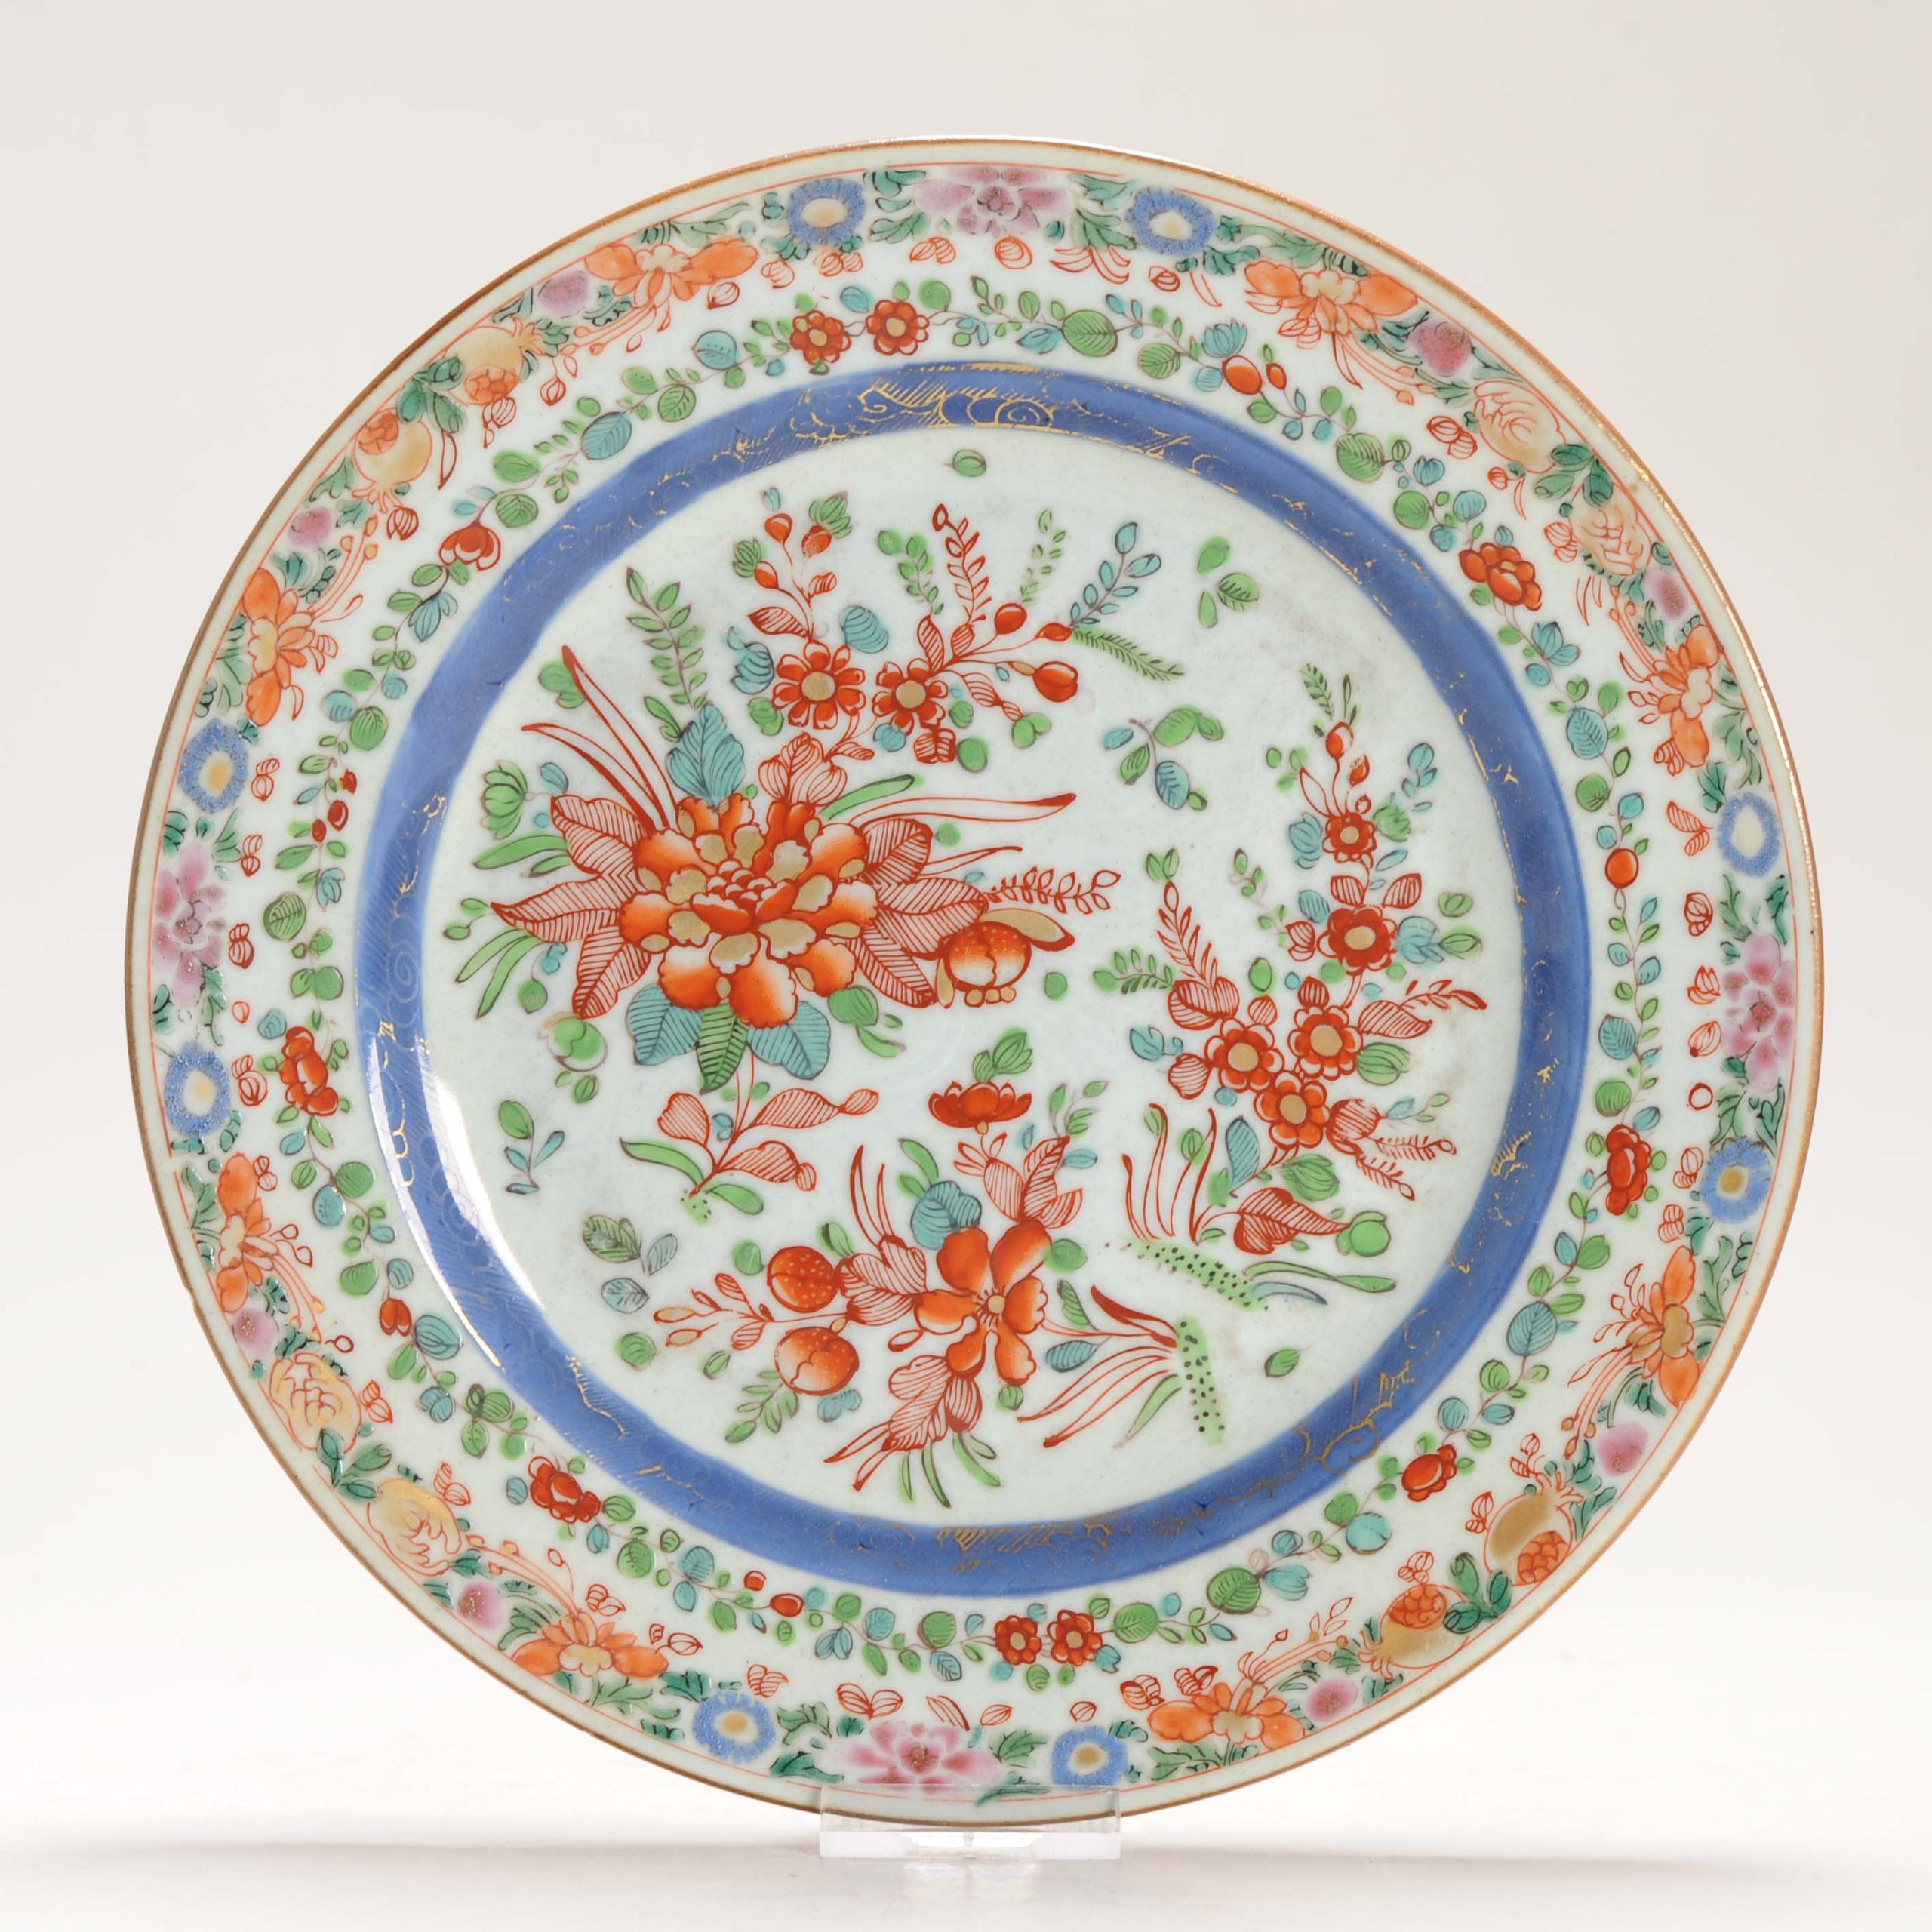 1261 A Lovely Plate. Painted in Europe on a Chinese blue and white / Fencai Dish